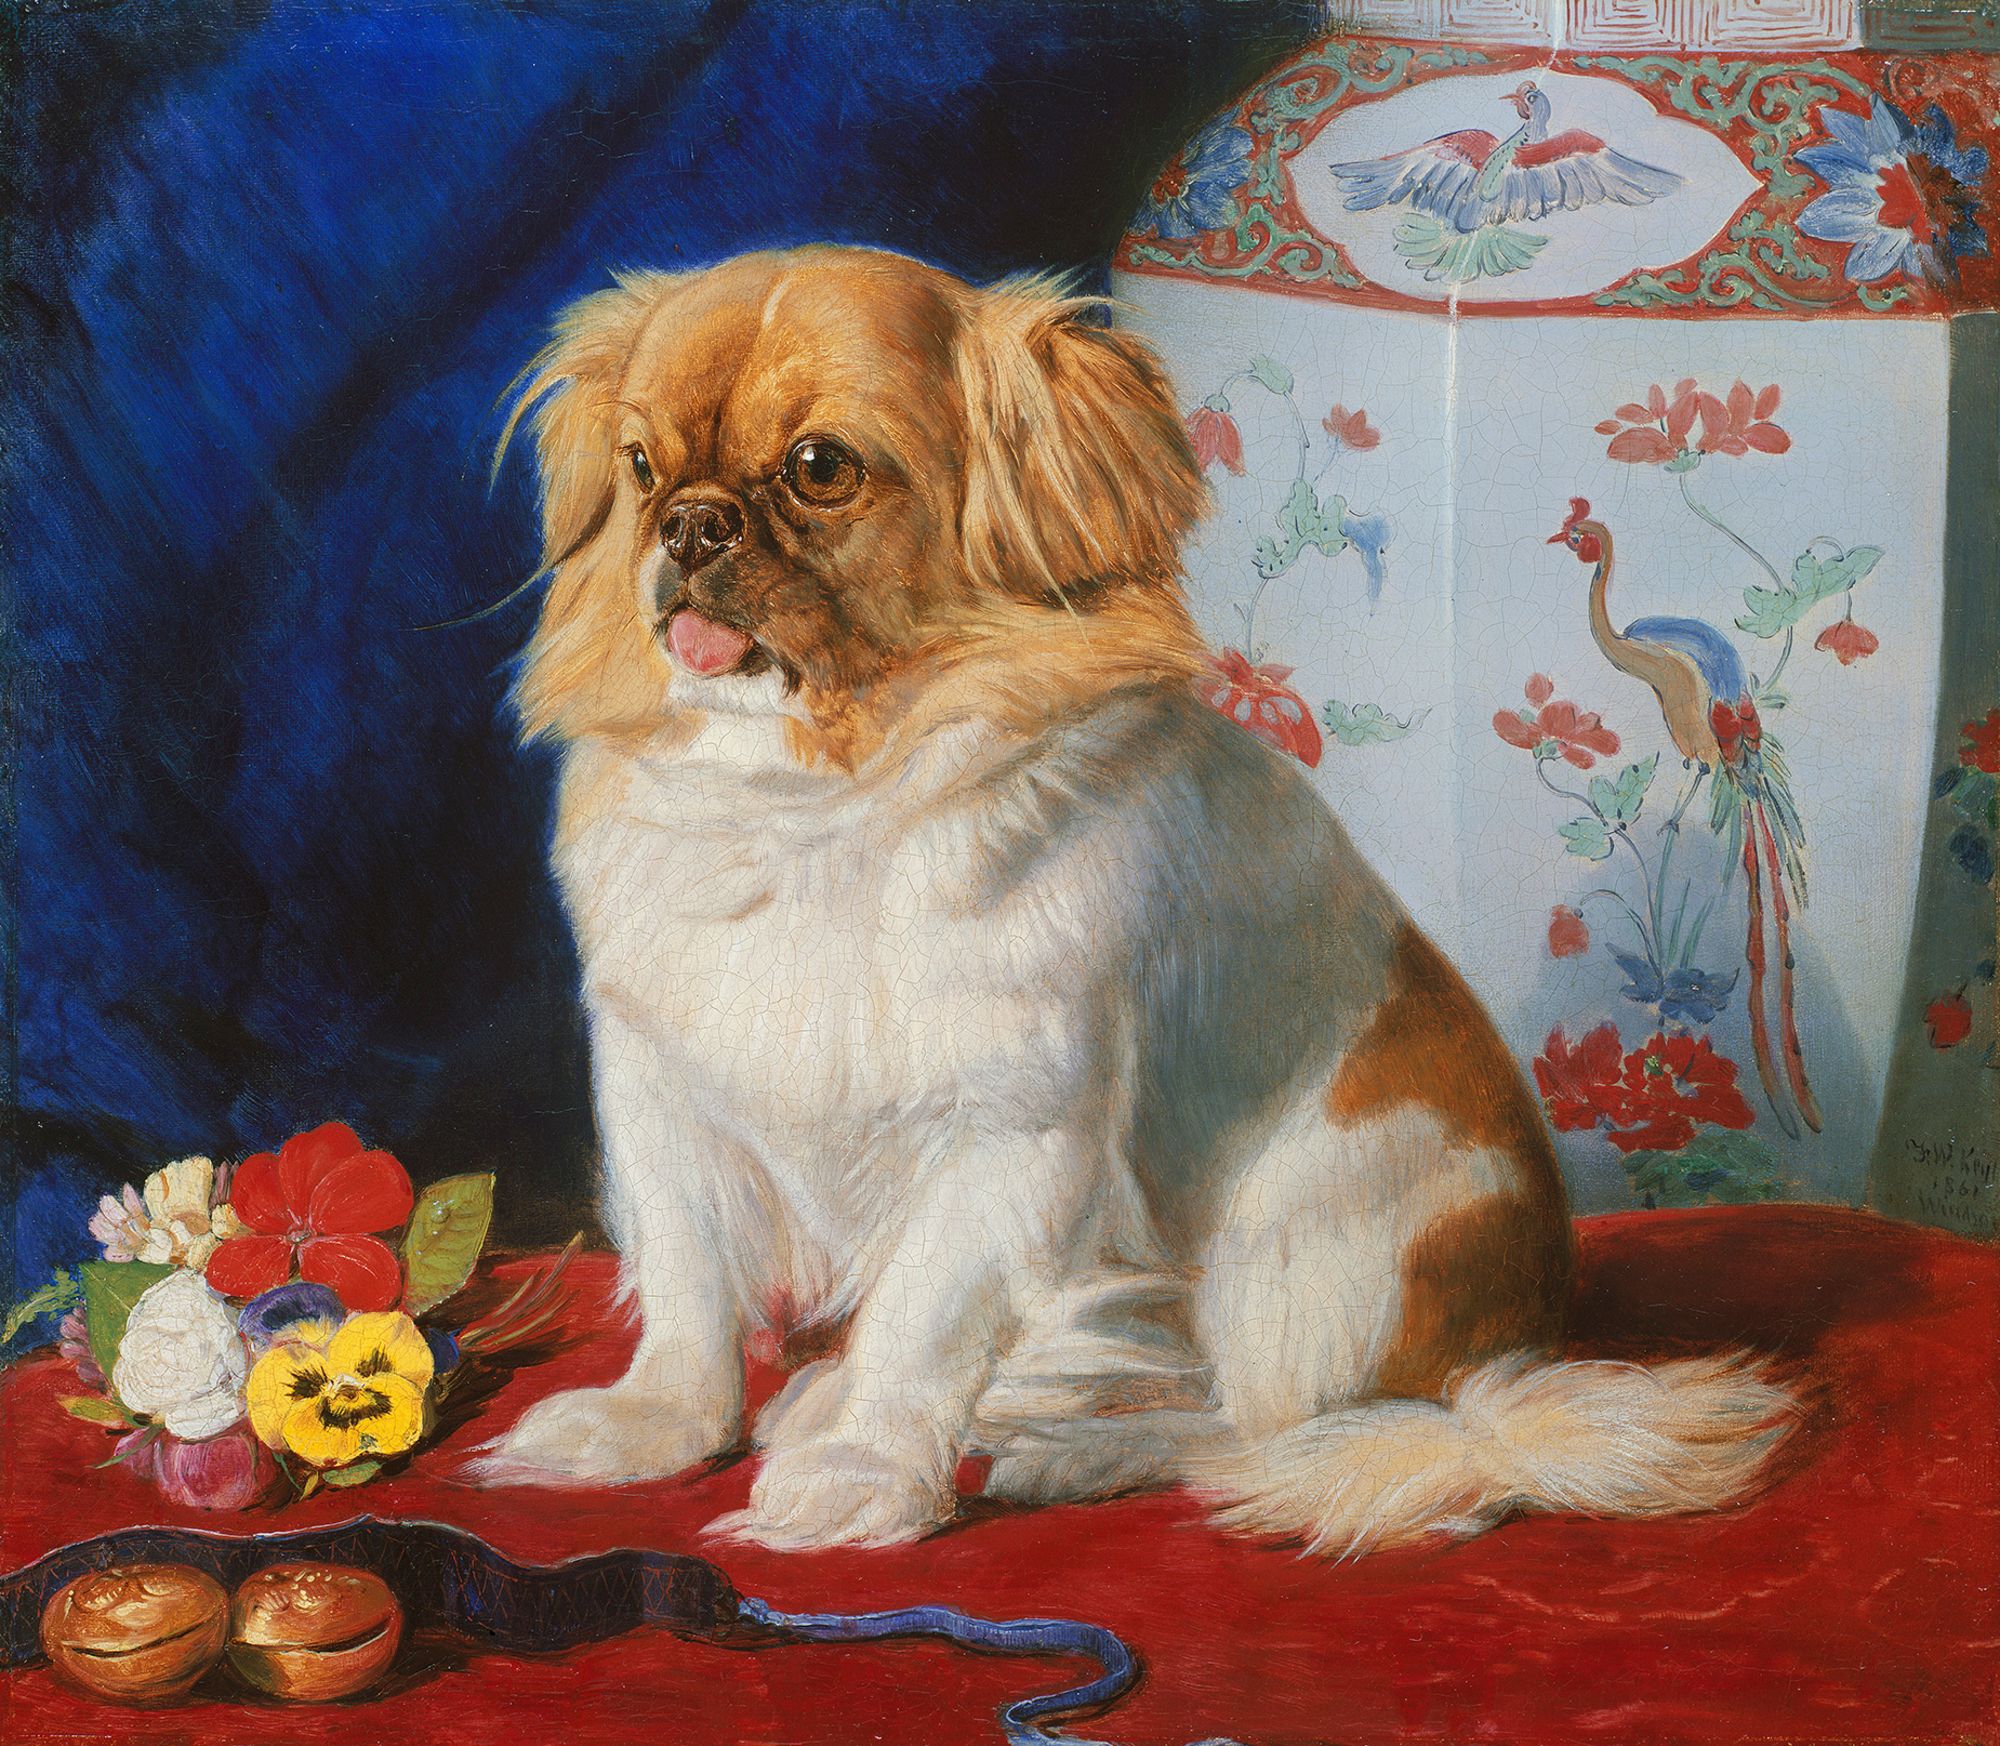 Friedrich Wilhelm Keyl's painting of Looty the dog, commissioned by her owner Queen Victoria. 